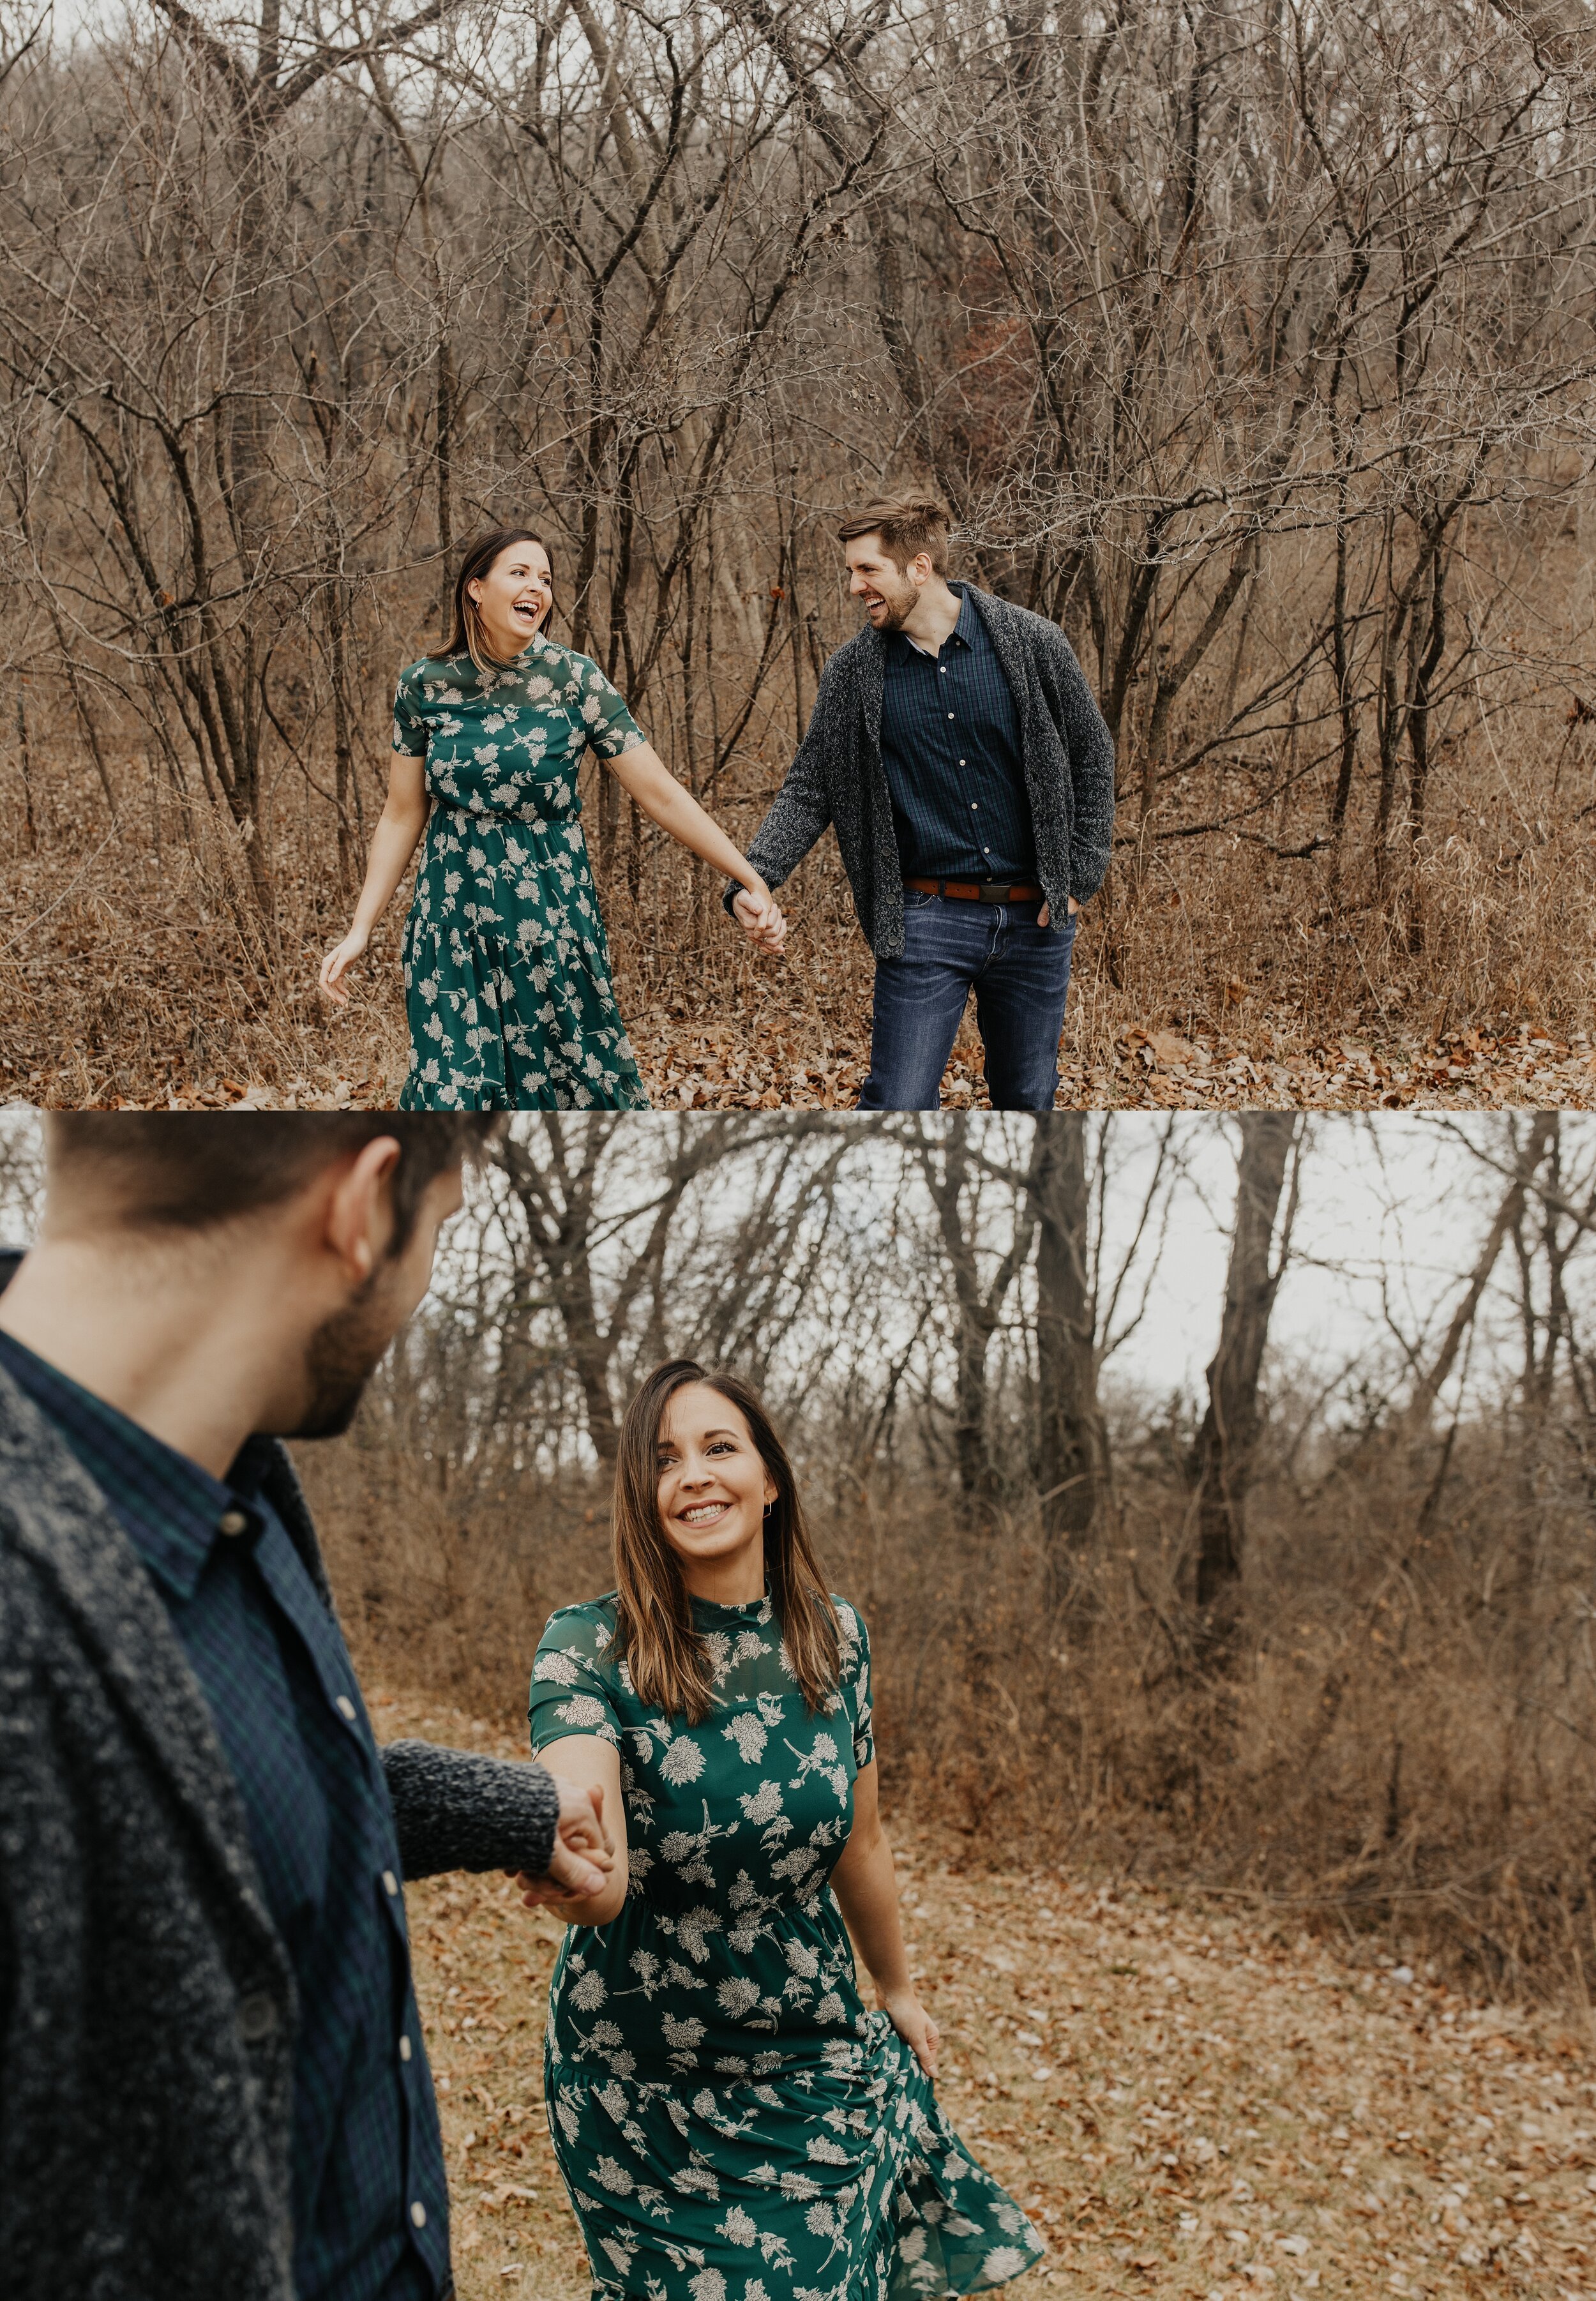 jessika-christine-photography-in+home-engagement-couples-cozy-adventurous-session (17).jpg